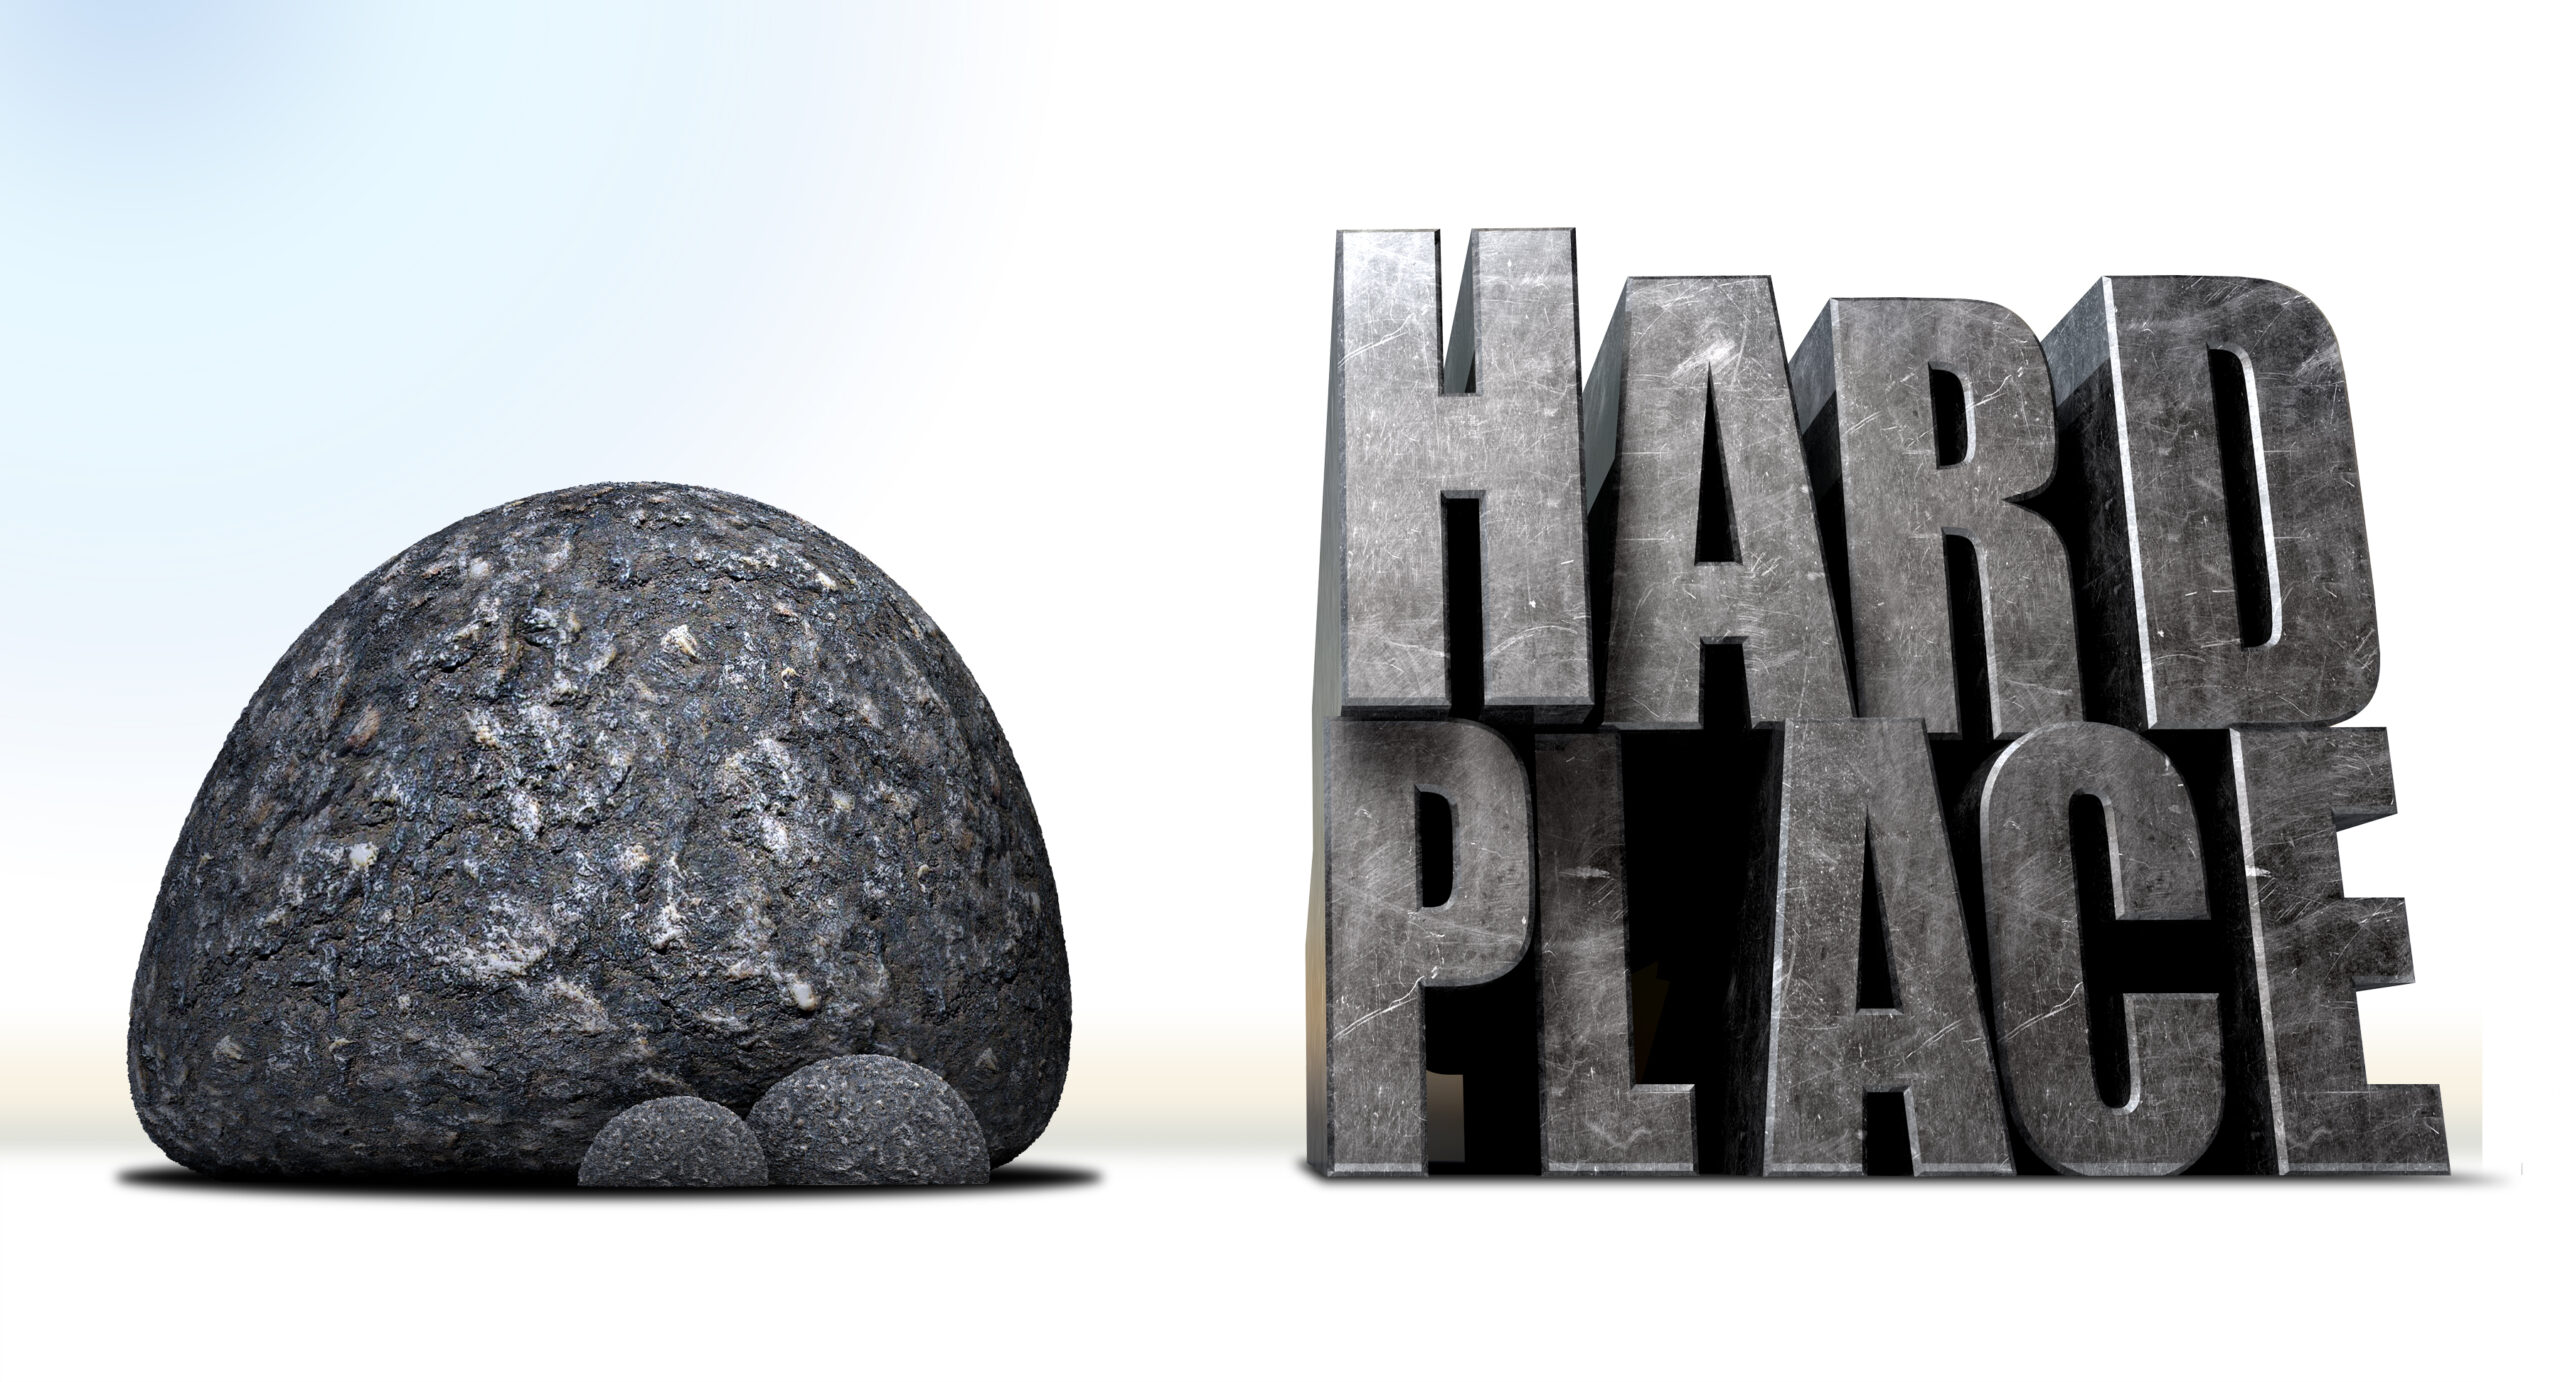 HR Personal Bias - Stuck between a rock and a hard place